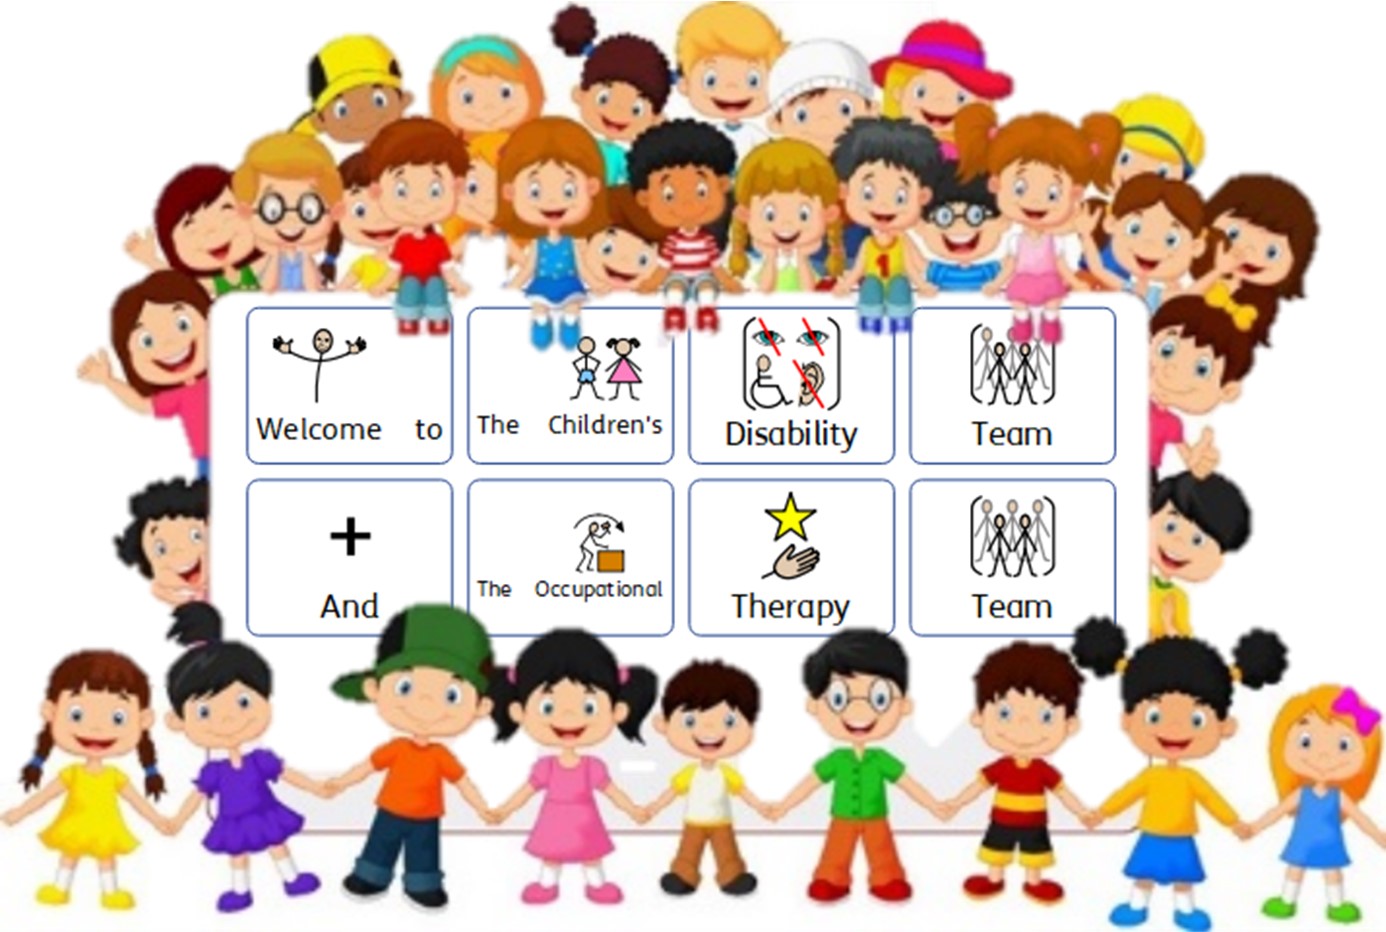 welcome to the children's disability team and the occupational therapy team